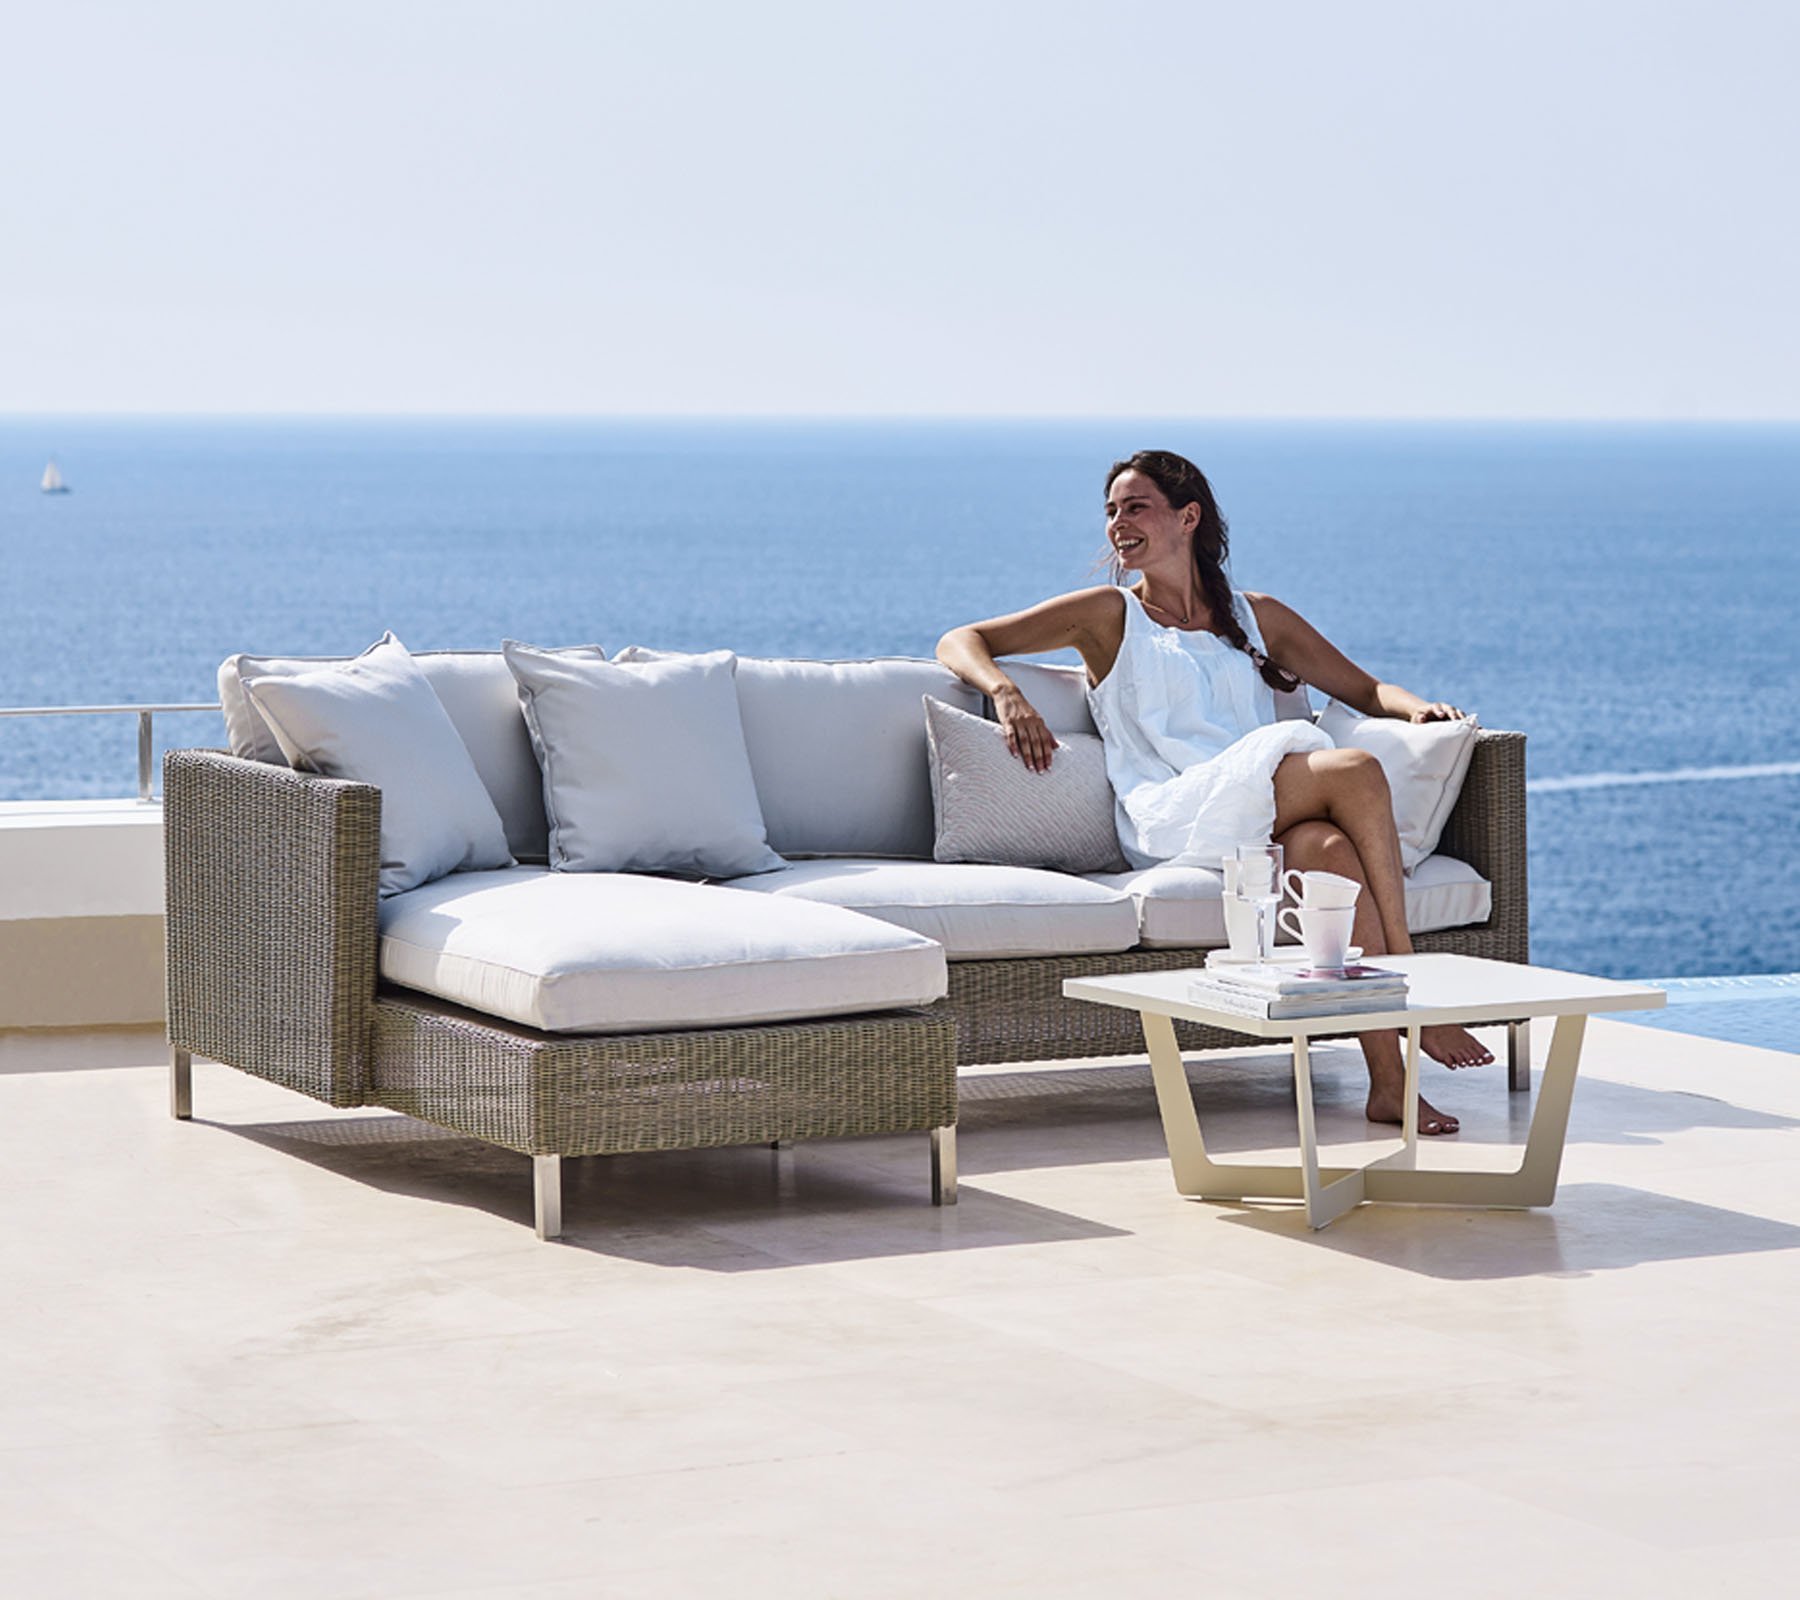 Cane-line Connect Right Chaise Lounger | Wooden | Outdoor-Patio ...